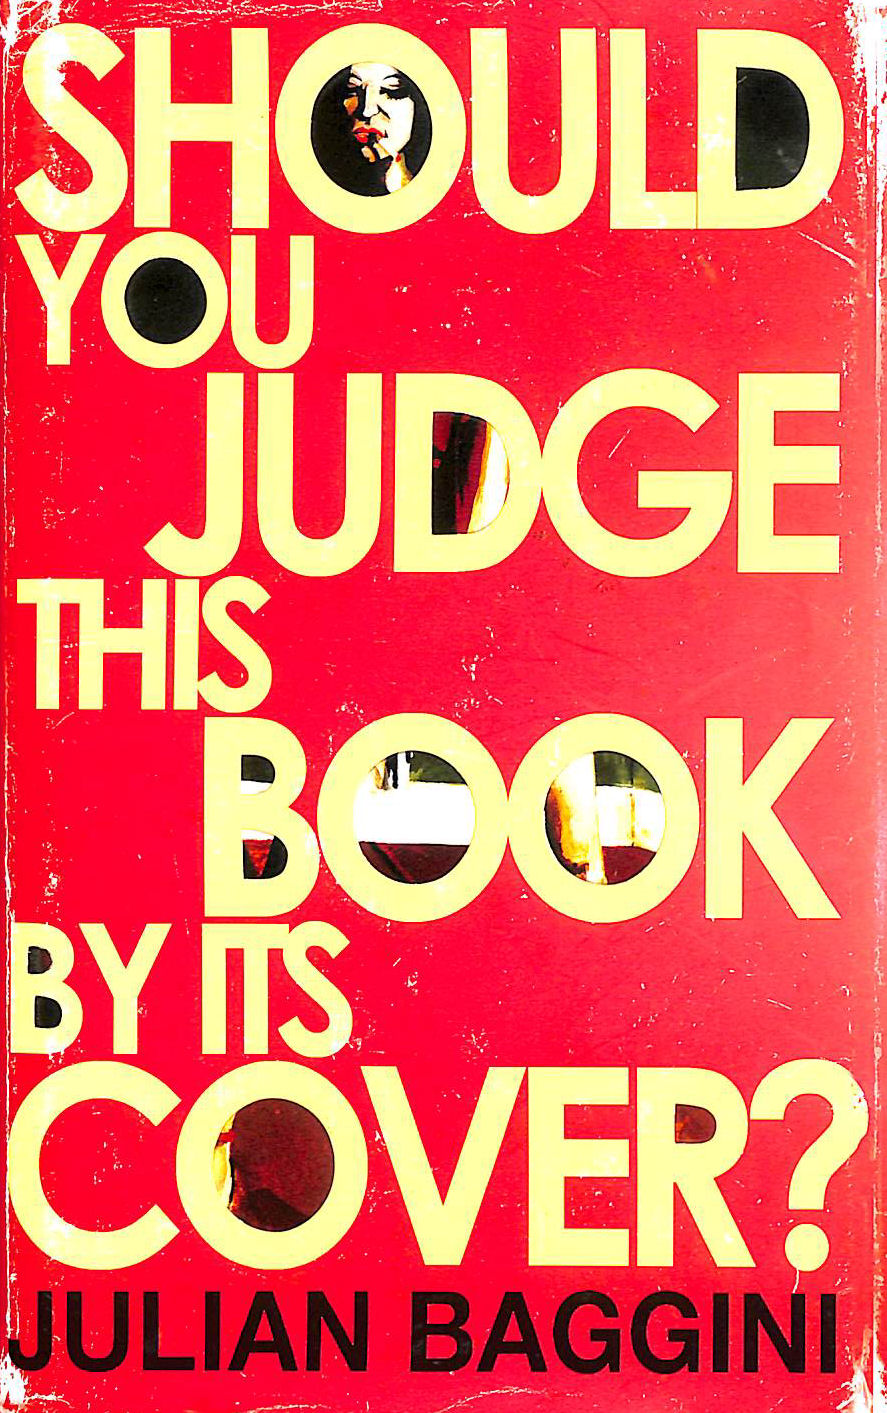 BAGGINI, JULIAN - Should You Judge This Book by its Cover?